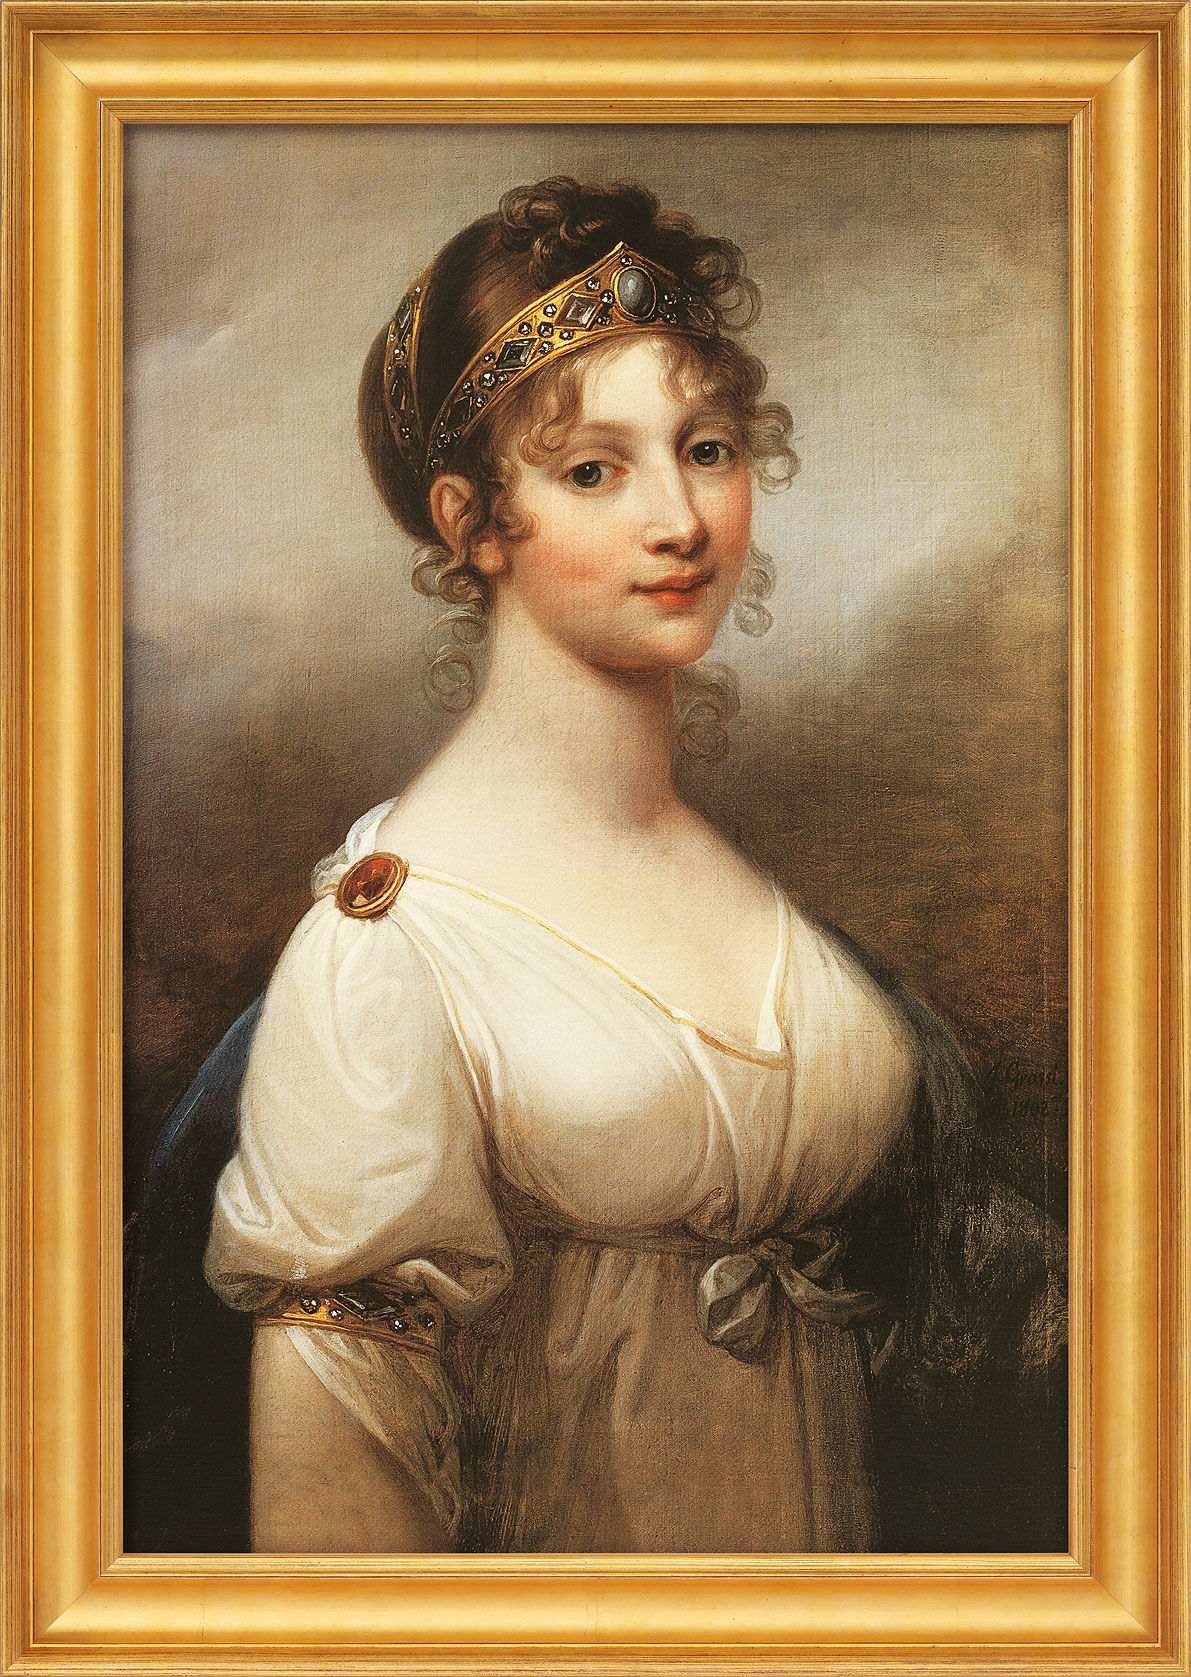 Picture "Luise, Queen of Prussia" (1802), framed by Joseph Grassi